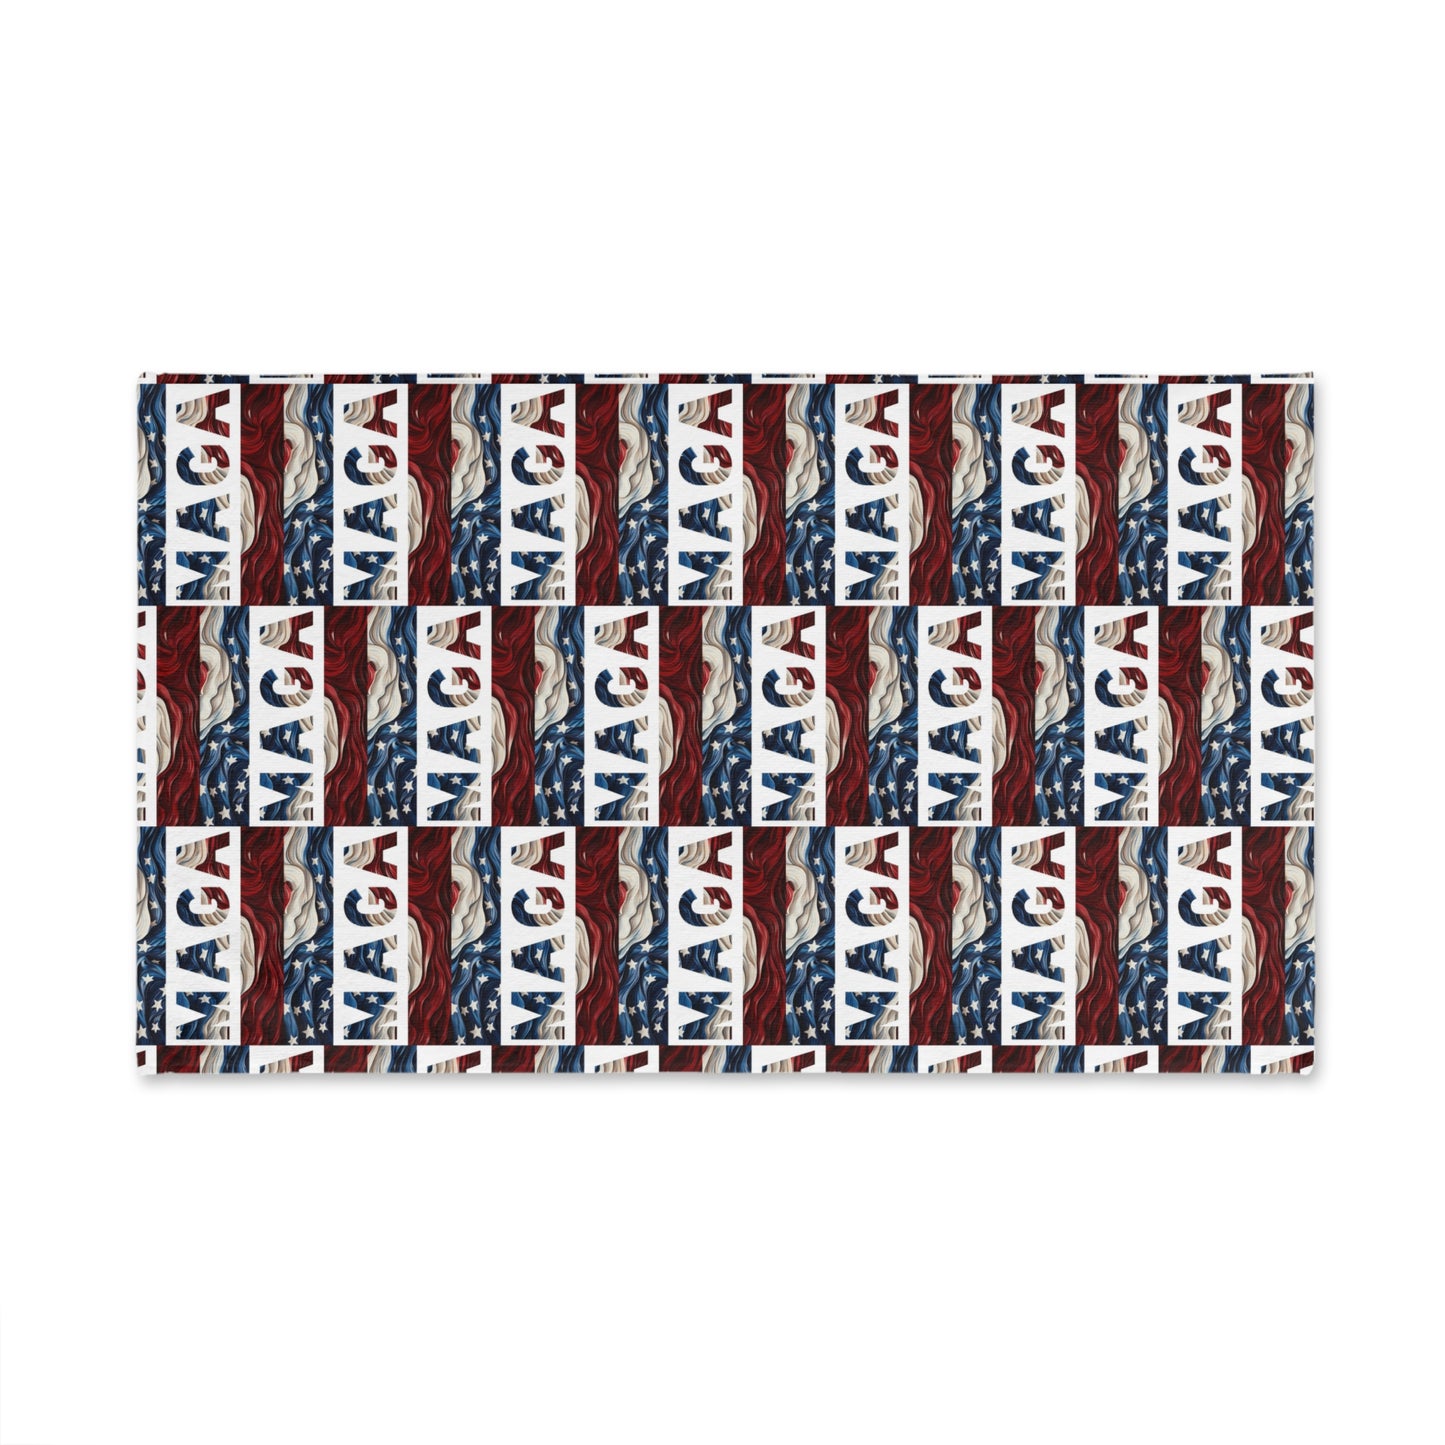 MAGA Red white and blue American Kitchen Bathroom Soft Hand Towel